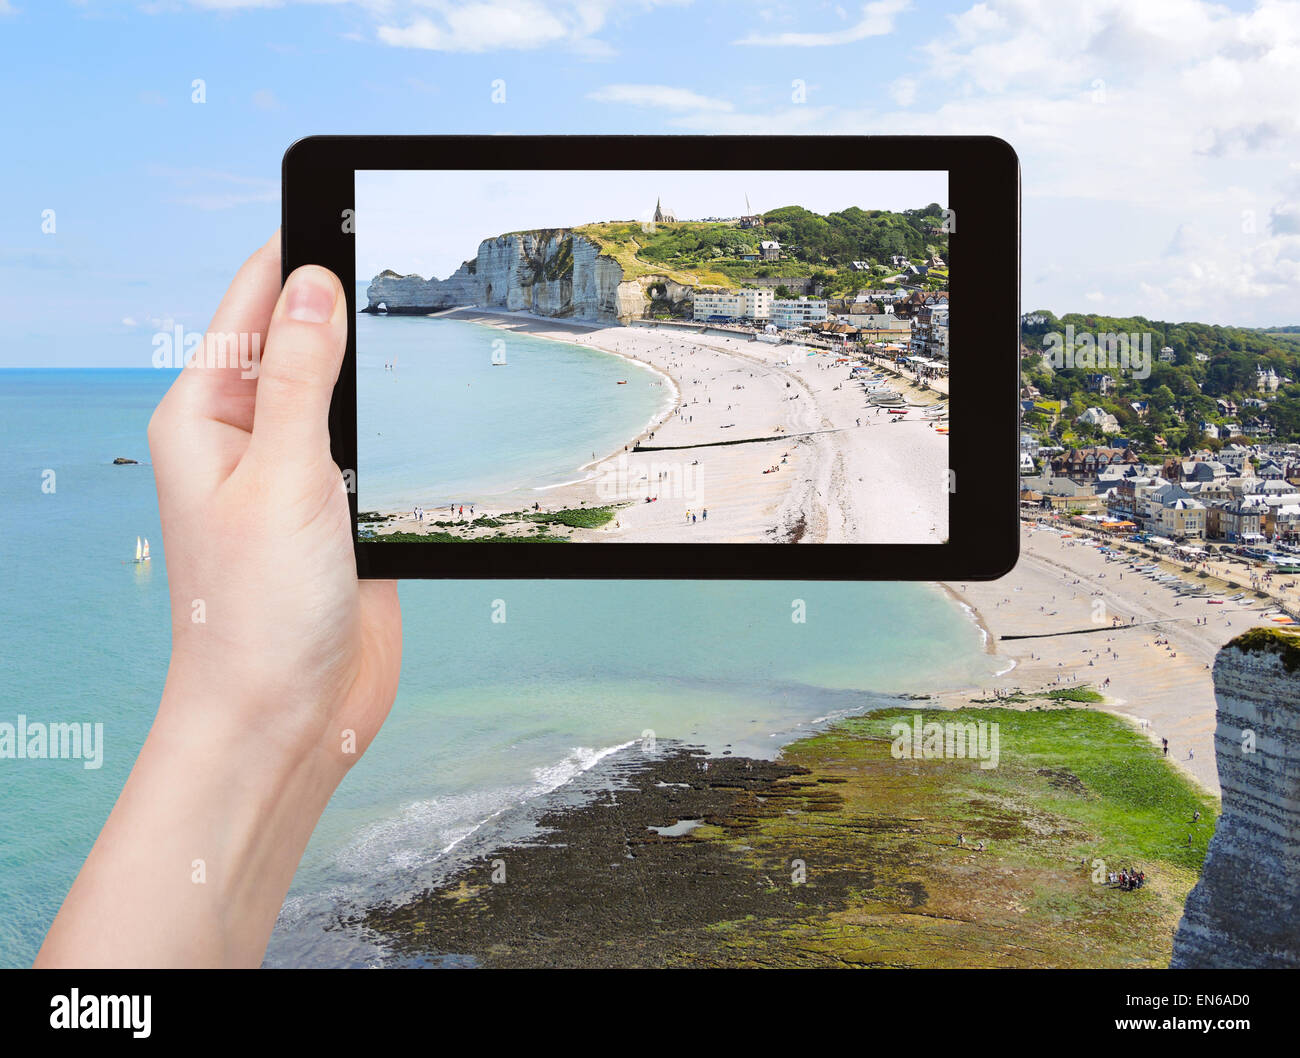 travel concept - tourist takes picture of Etretat resort village on english channel beach of cote d'albatre, France on tablet pc Stock Photo